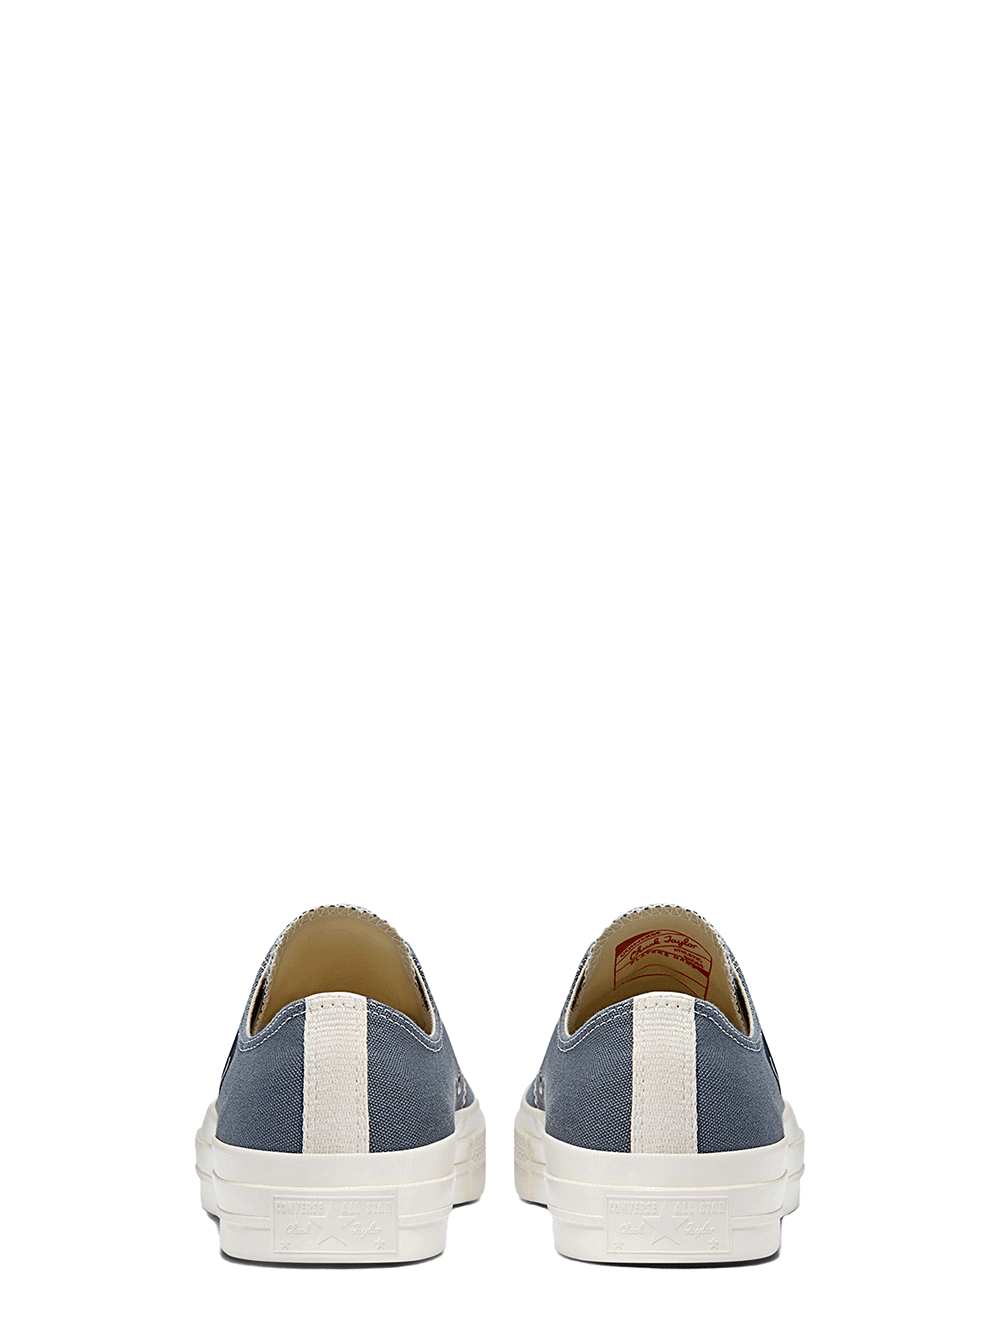 COMME-des-GARCONS-PLAY-CONVERSE-PLAY-Converse-Chuck-70-Peek-A-Boo-Heart-Low-Cut-Sneakers-Grey-3